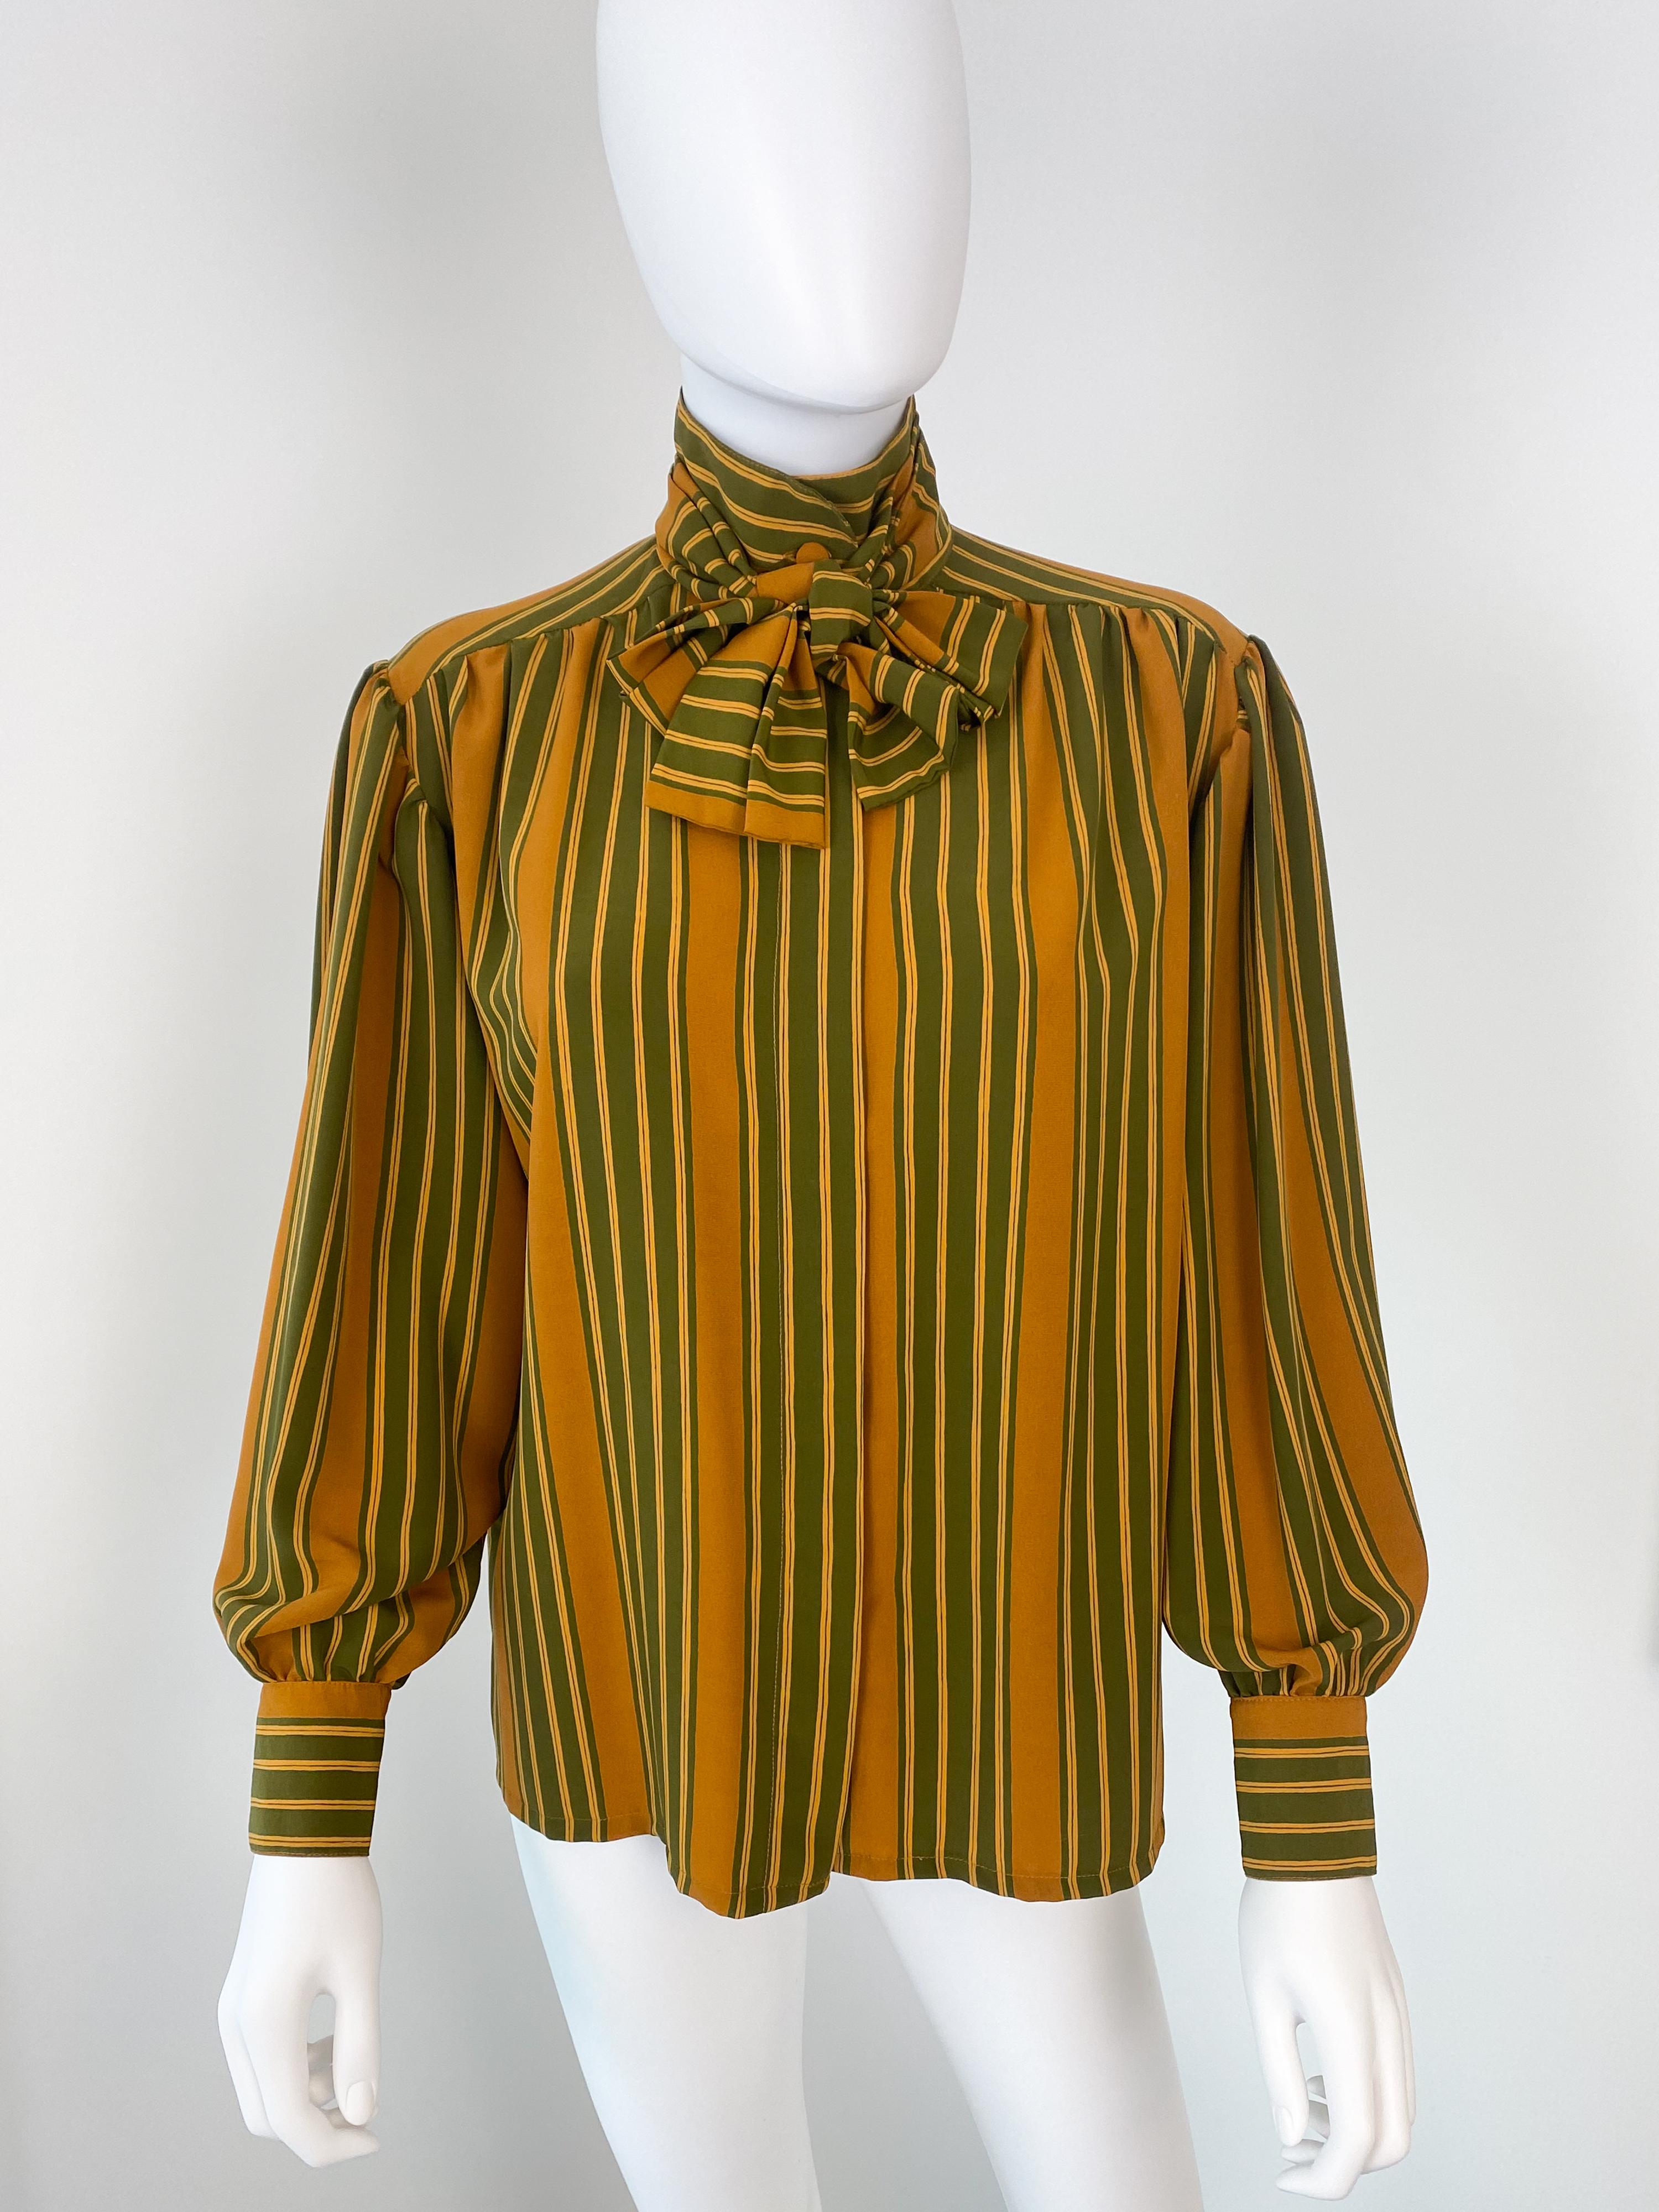 Wonderful vintage 1980s silky polyester pussy bow blouse. Avocado green and saffron yellow color fabric striped pattern. With its original tie. 
There is ample pleating at the back and button cuffs to provide volume. Long sleeves with a cinch at the